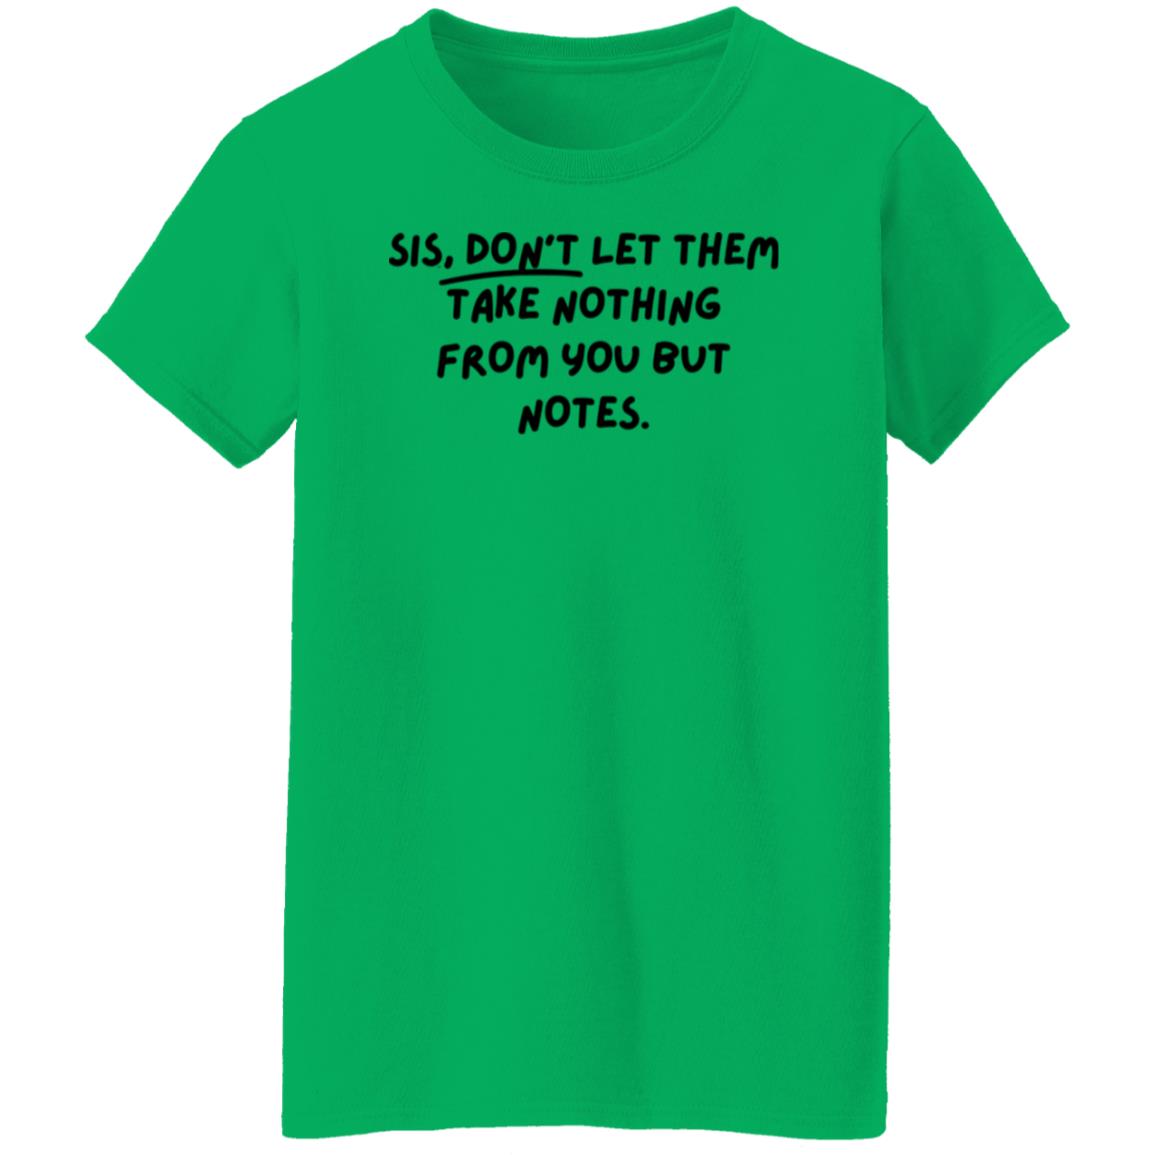 Sis, don't let them take nothing from you but notes. T-Shirt